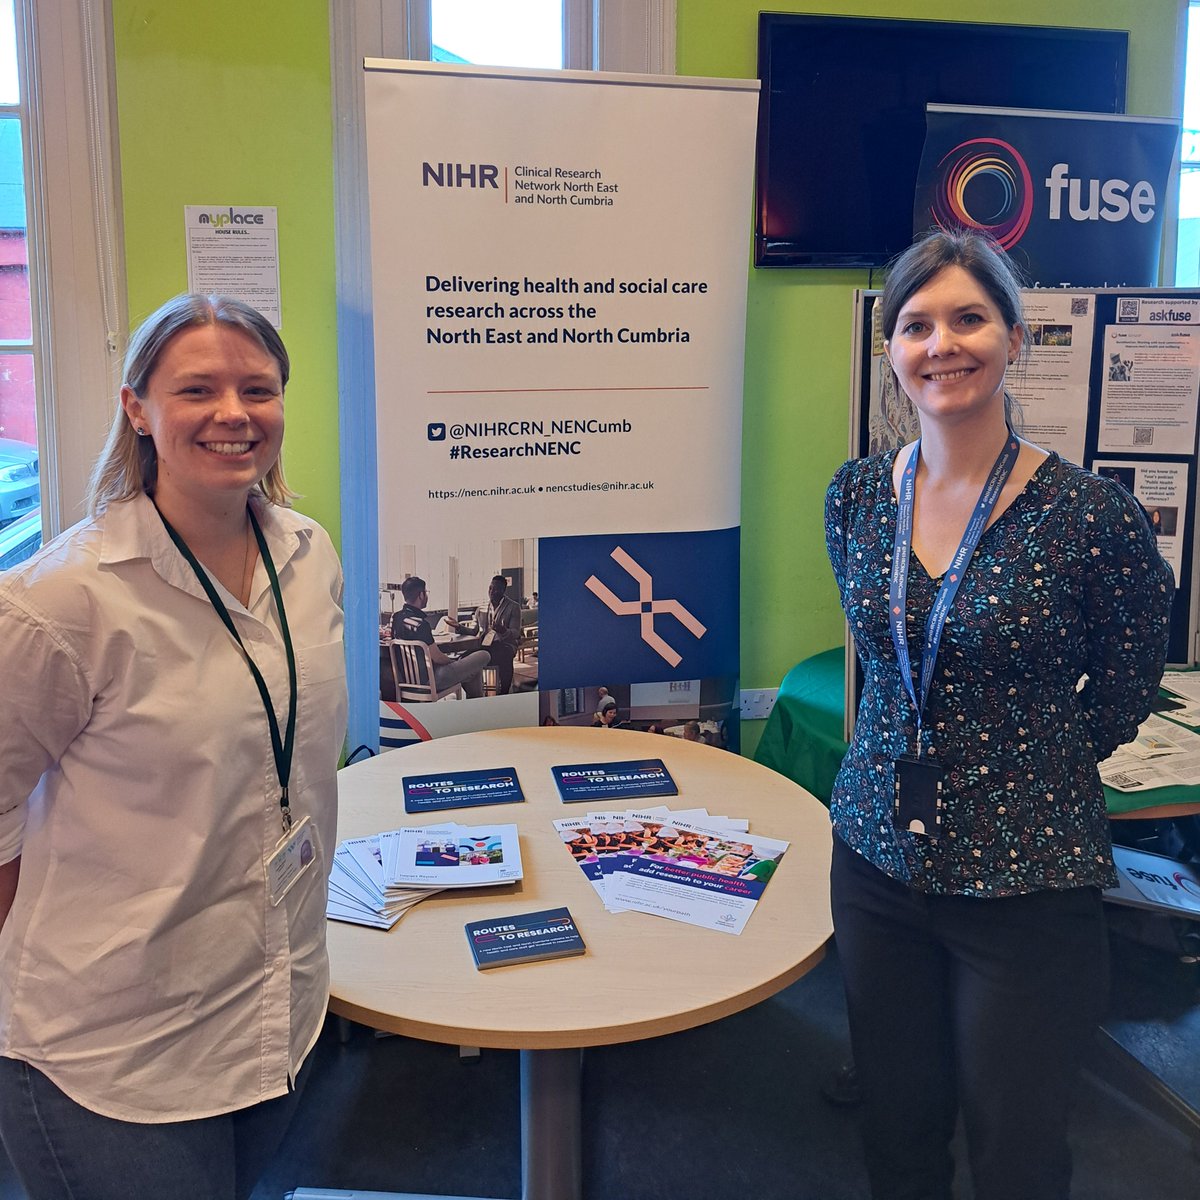 We were delighted to attend the @HDRCSouthTees launch event in Middlesbrough yesterday. Fantastic to chat to like-minded professionals about tackling health inequalities through #research in the South Tees area. Congratulations on a successful event 👏